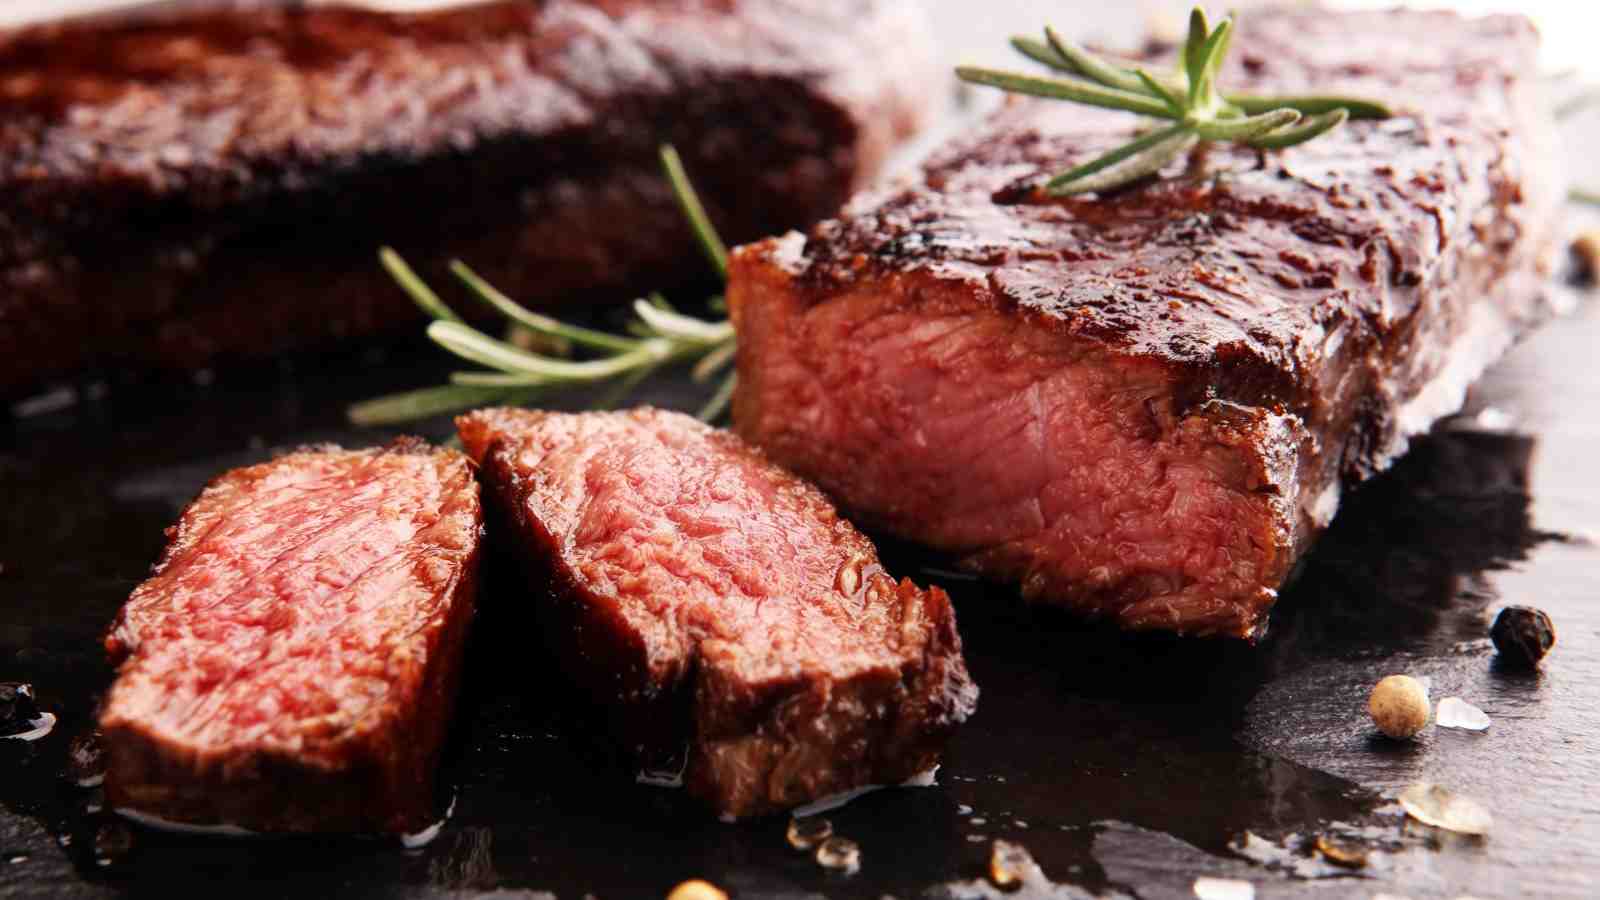 What state has the best steak?